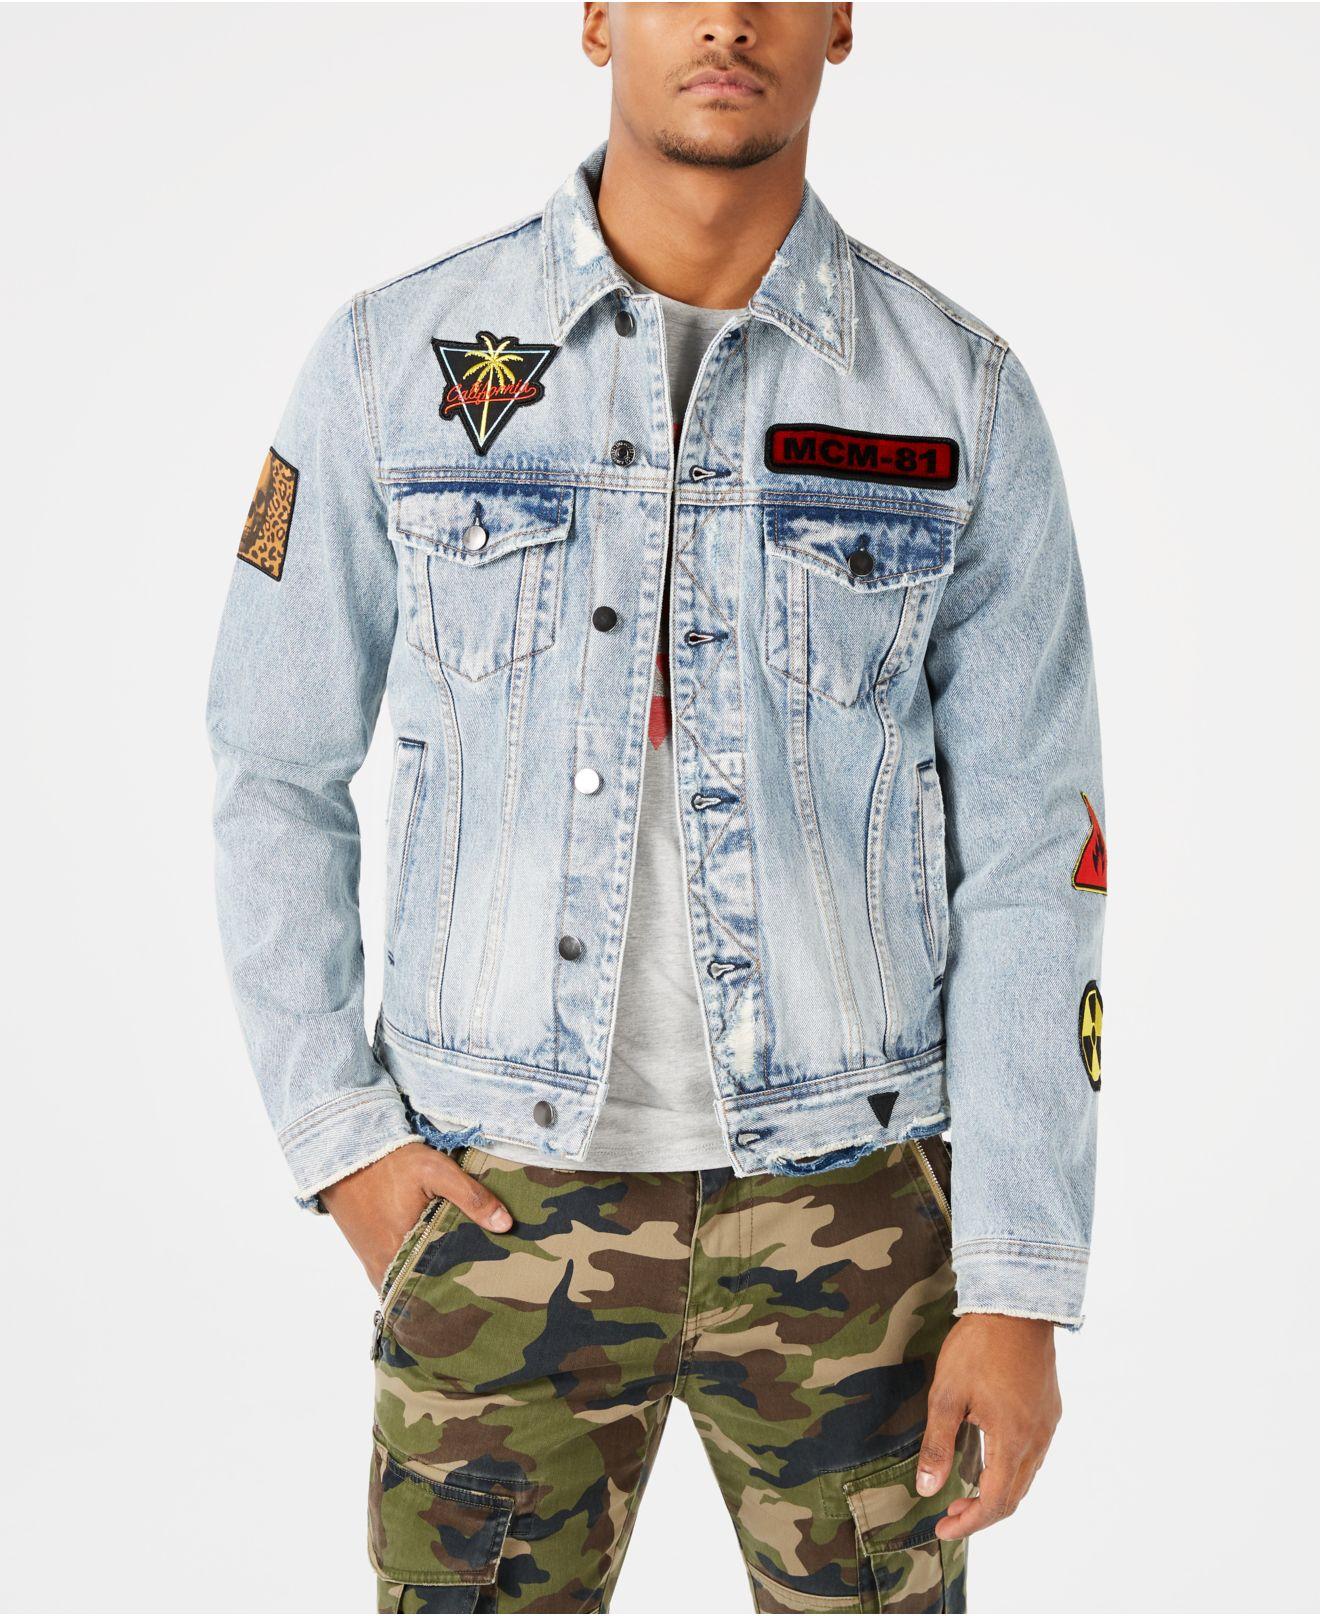 Guess Dillon Patch Denim Jacket in for